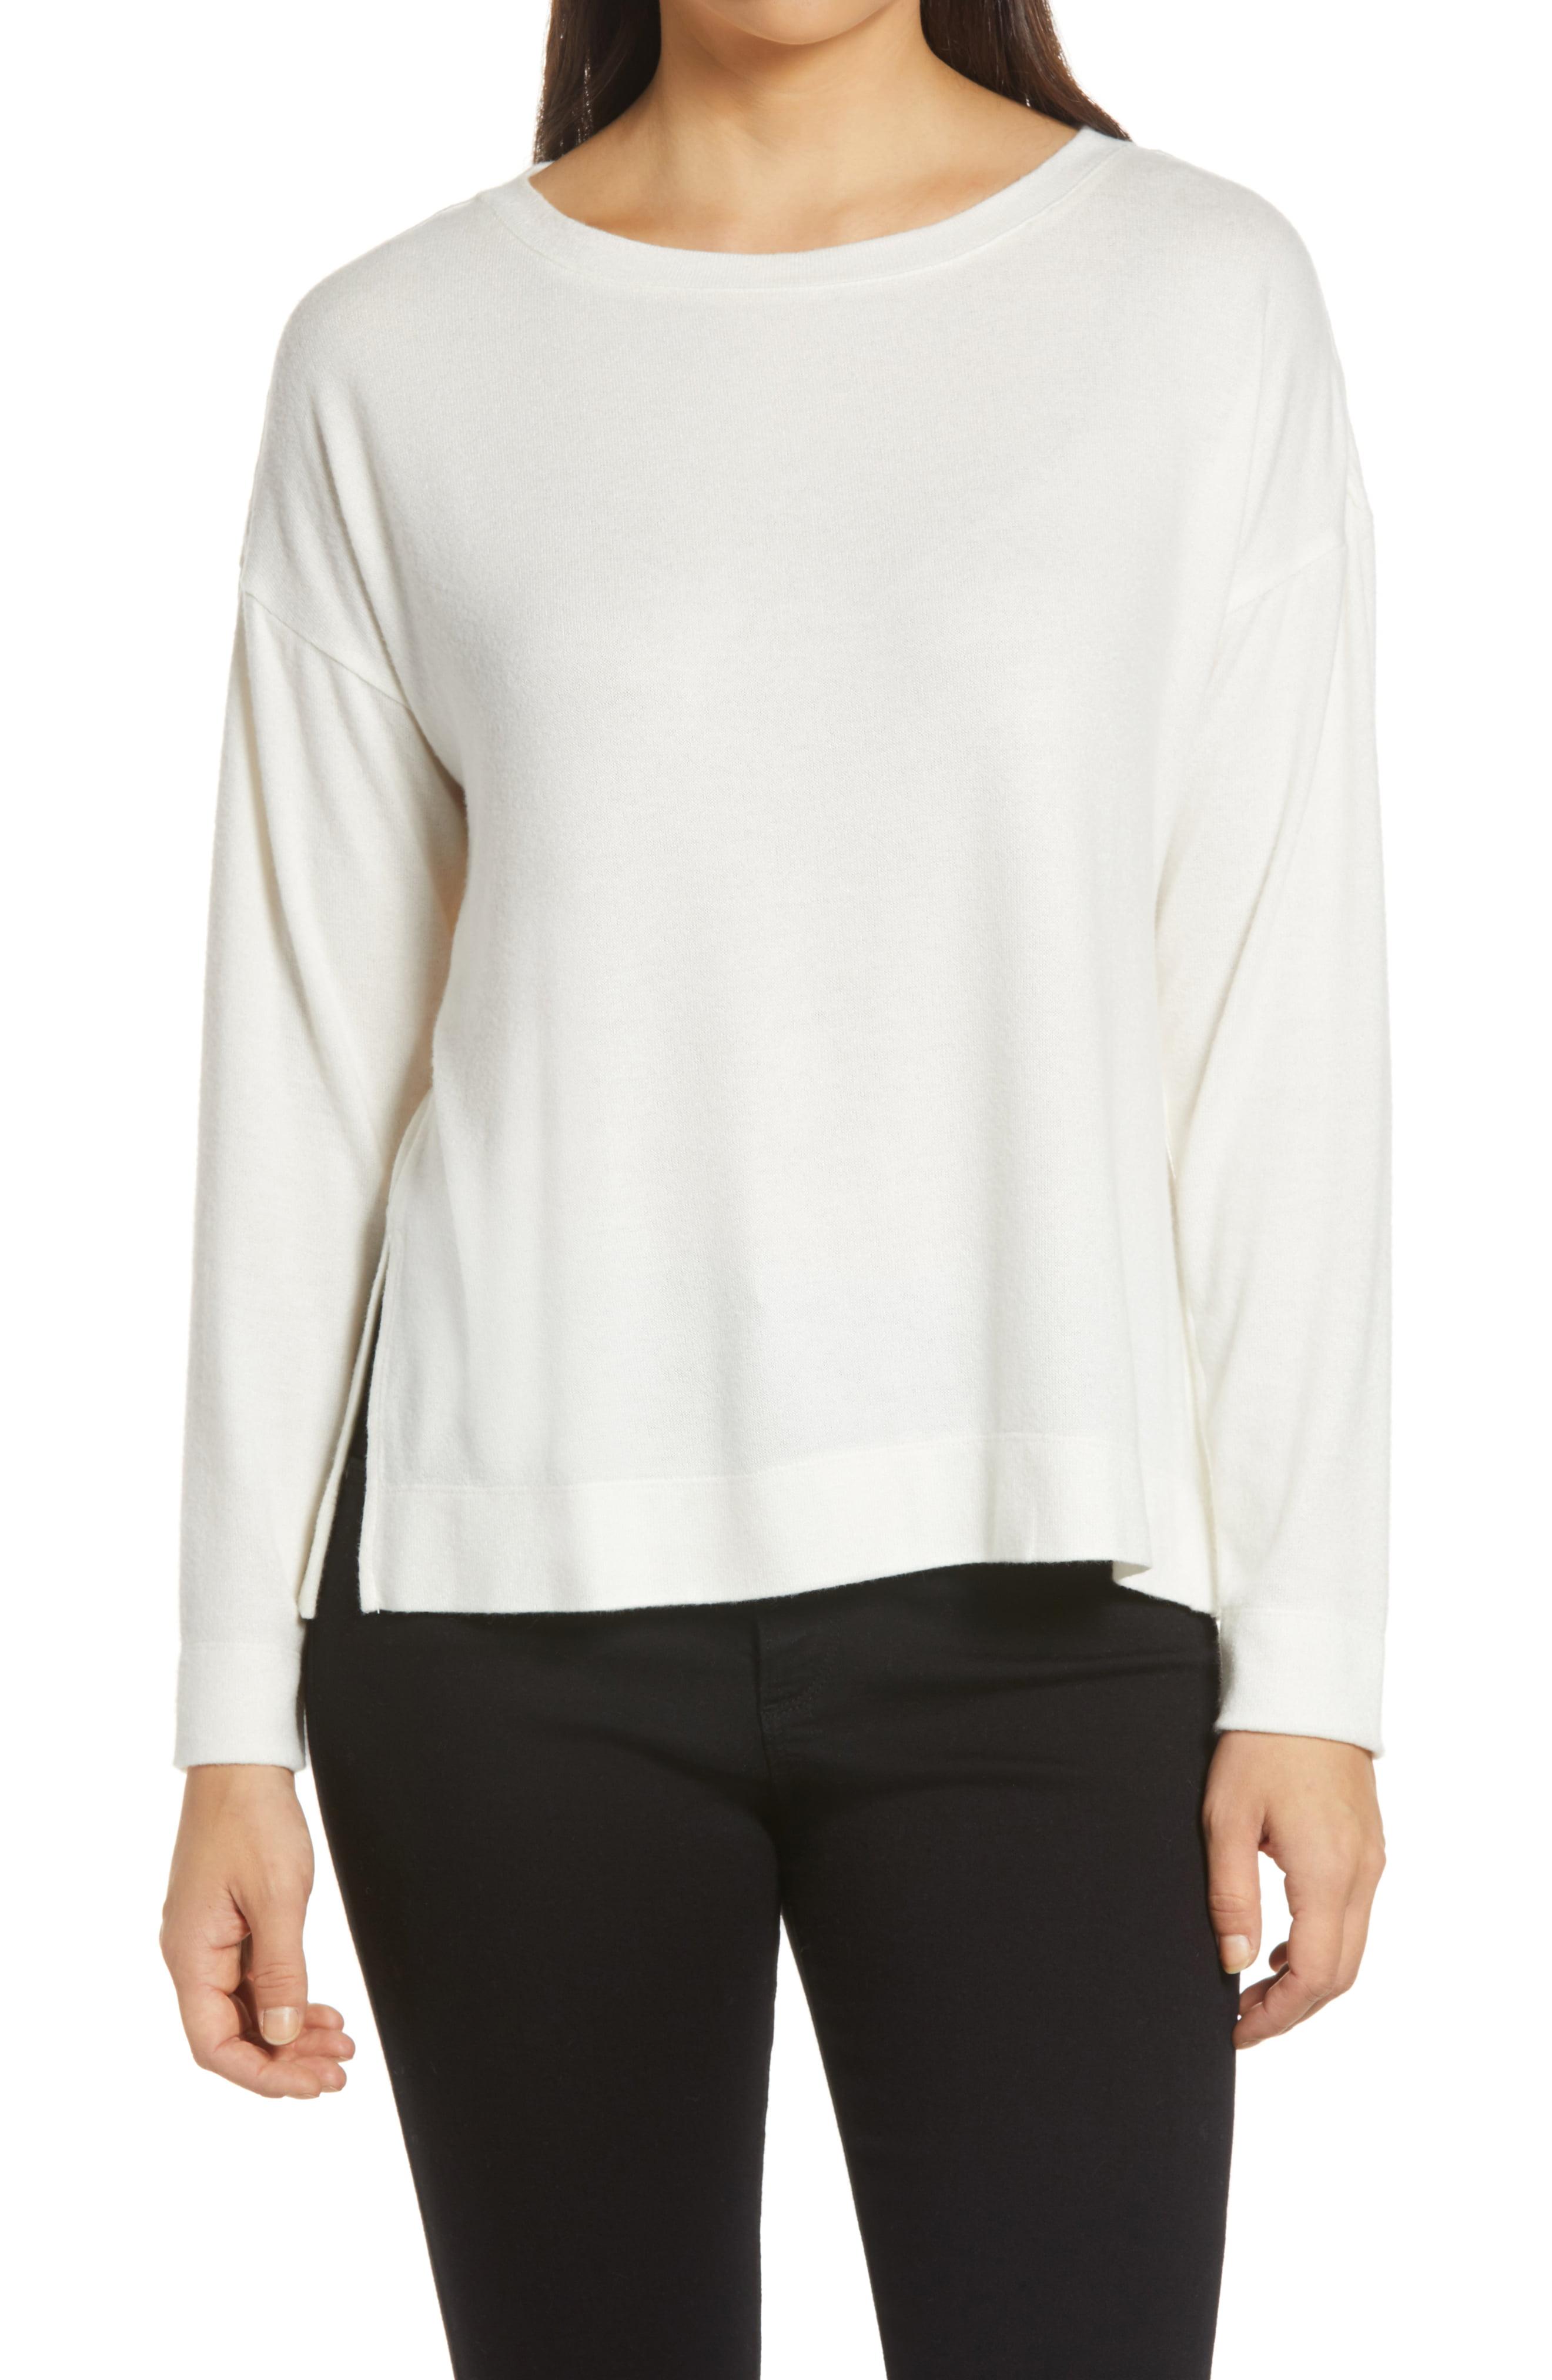 Tommy Bahama Island Soft Brushed Pullover in White - Lyst